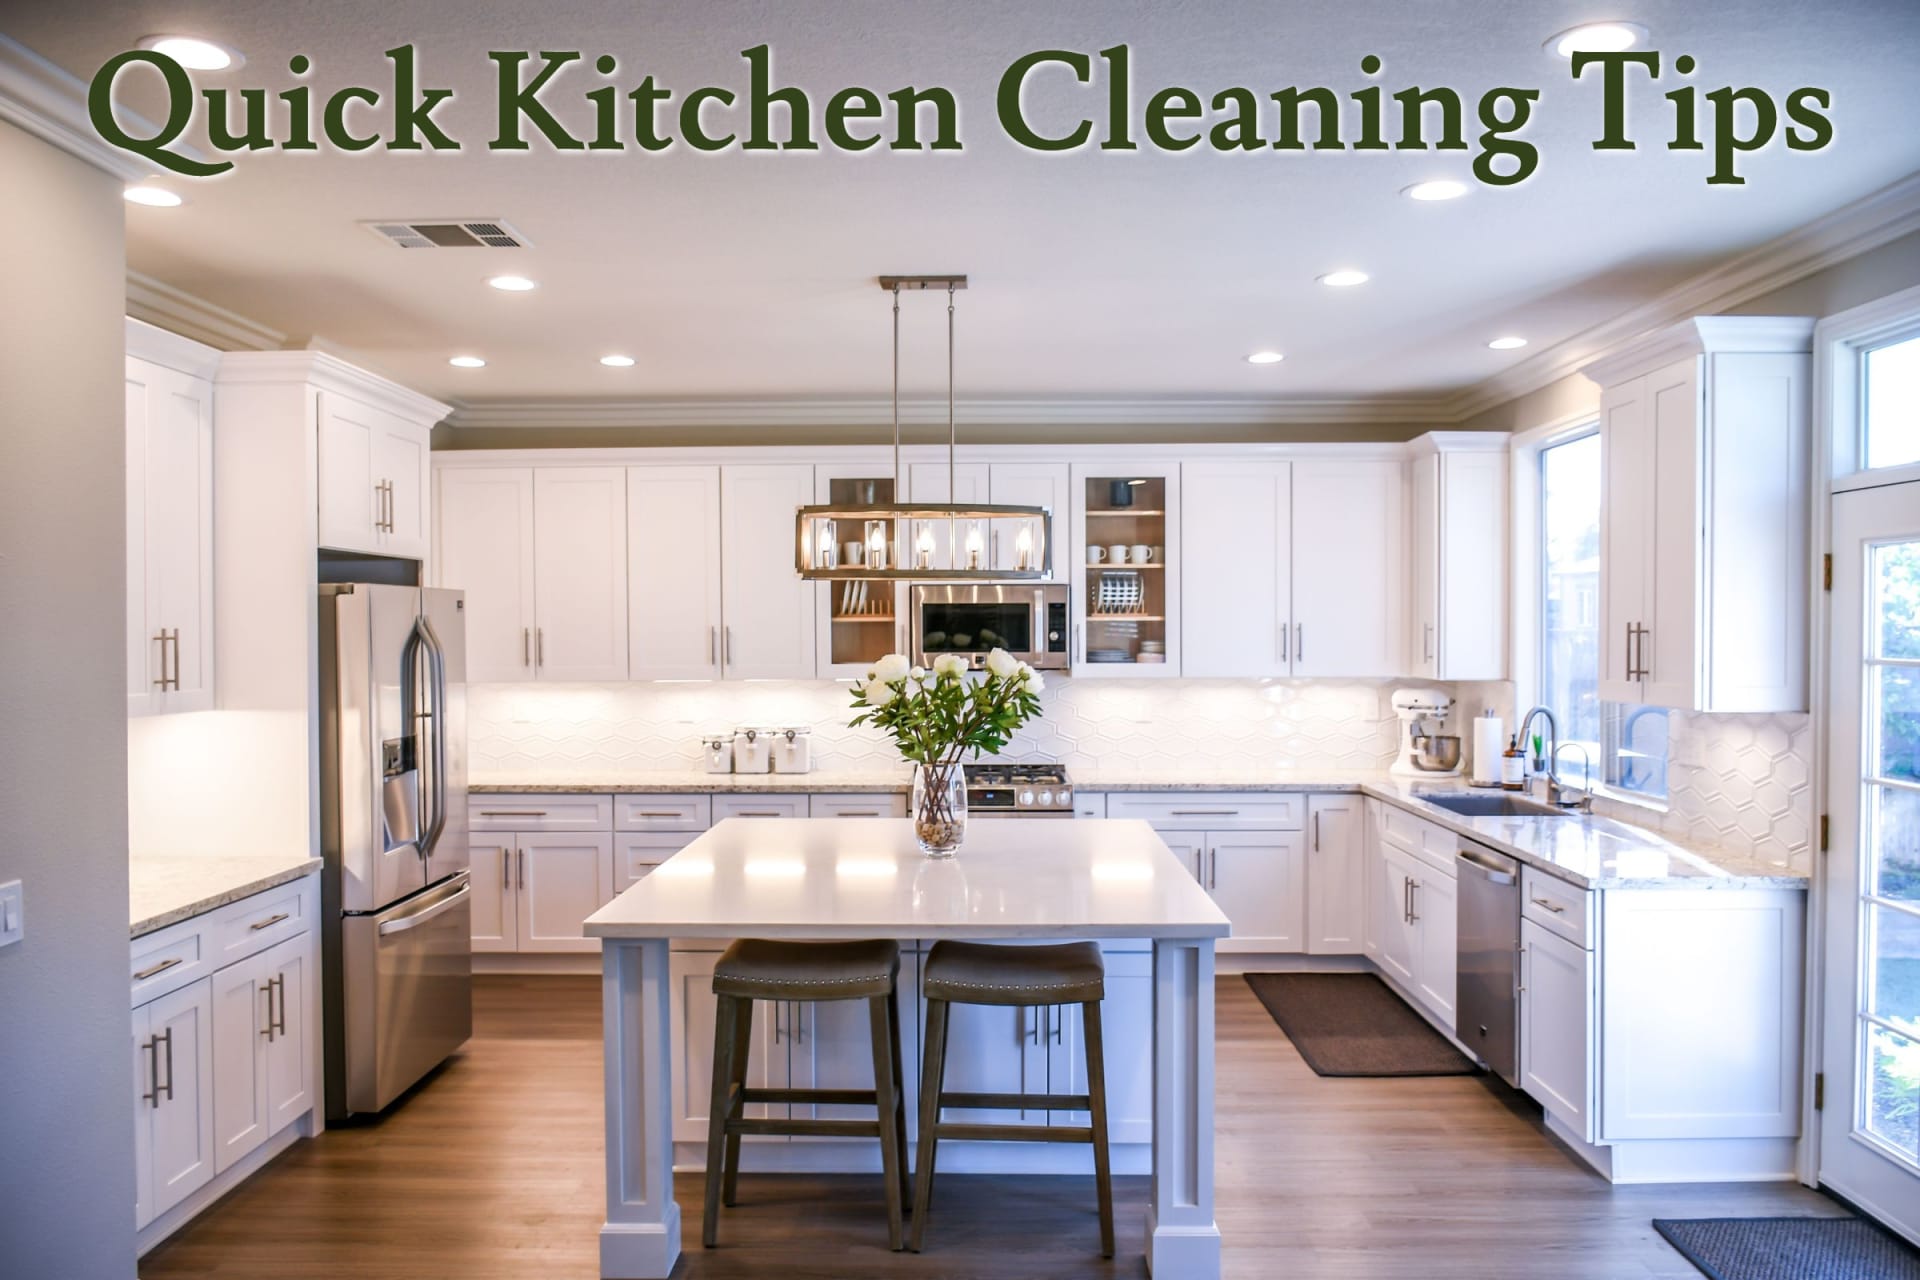 Quick Kitchen Cleaning Tips